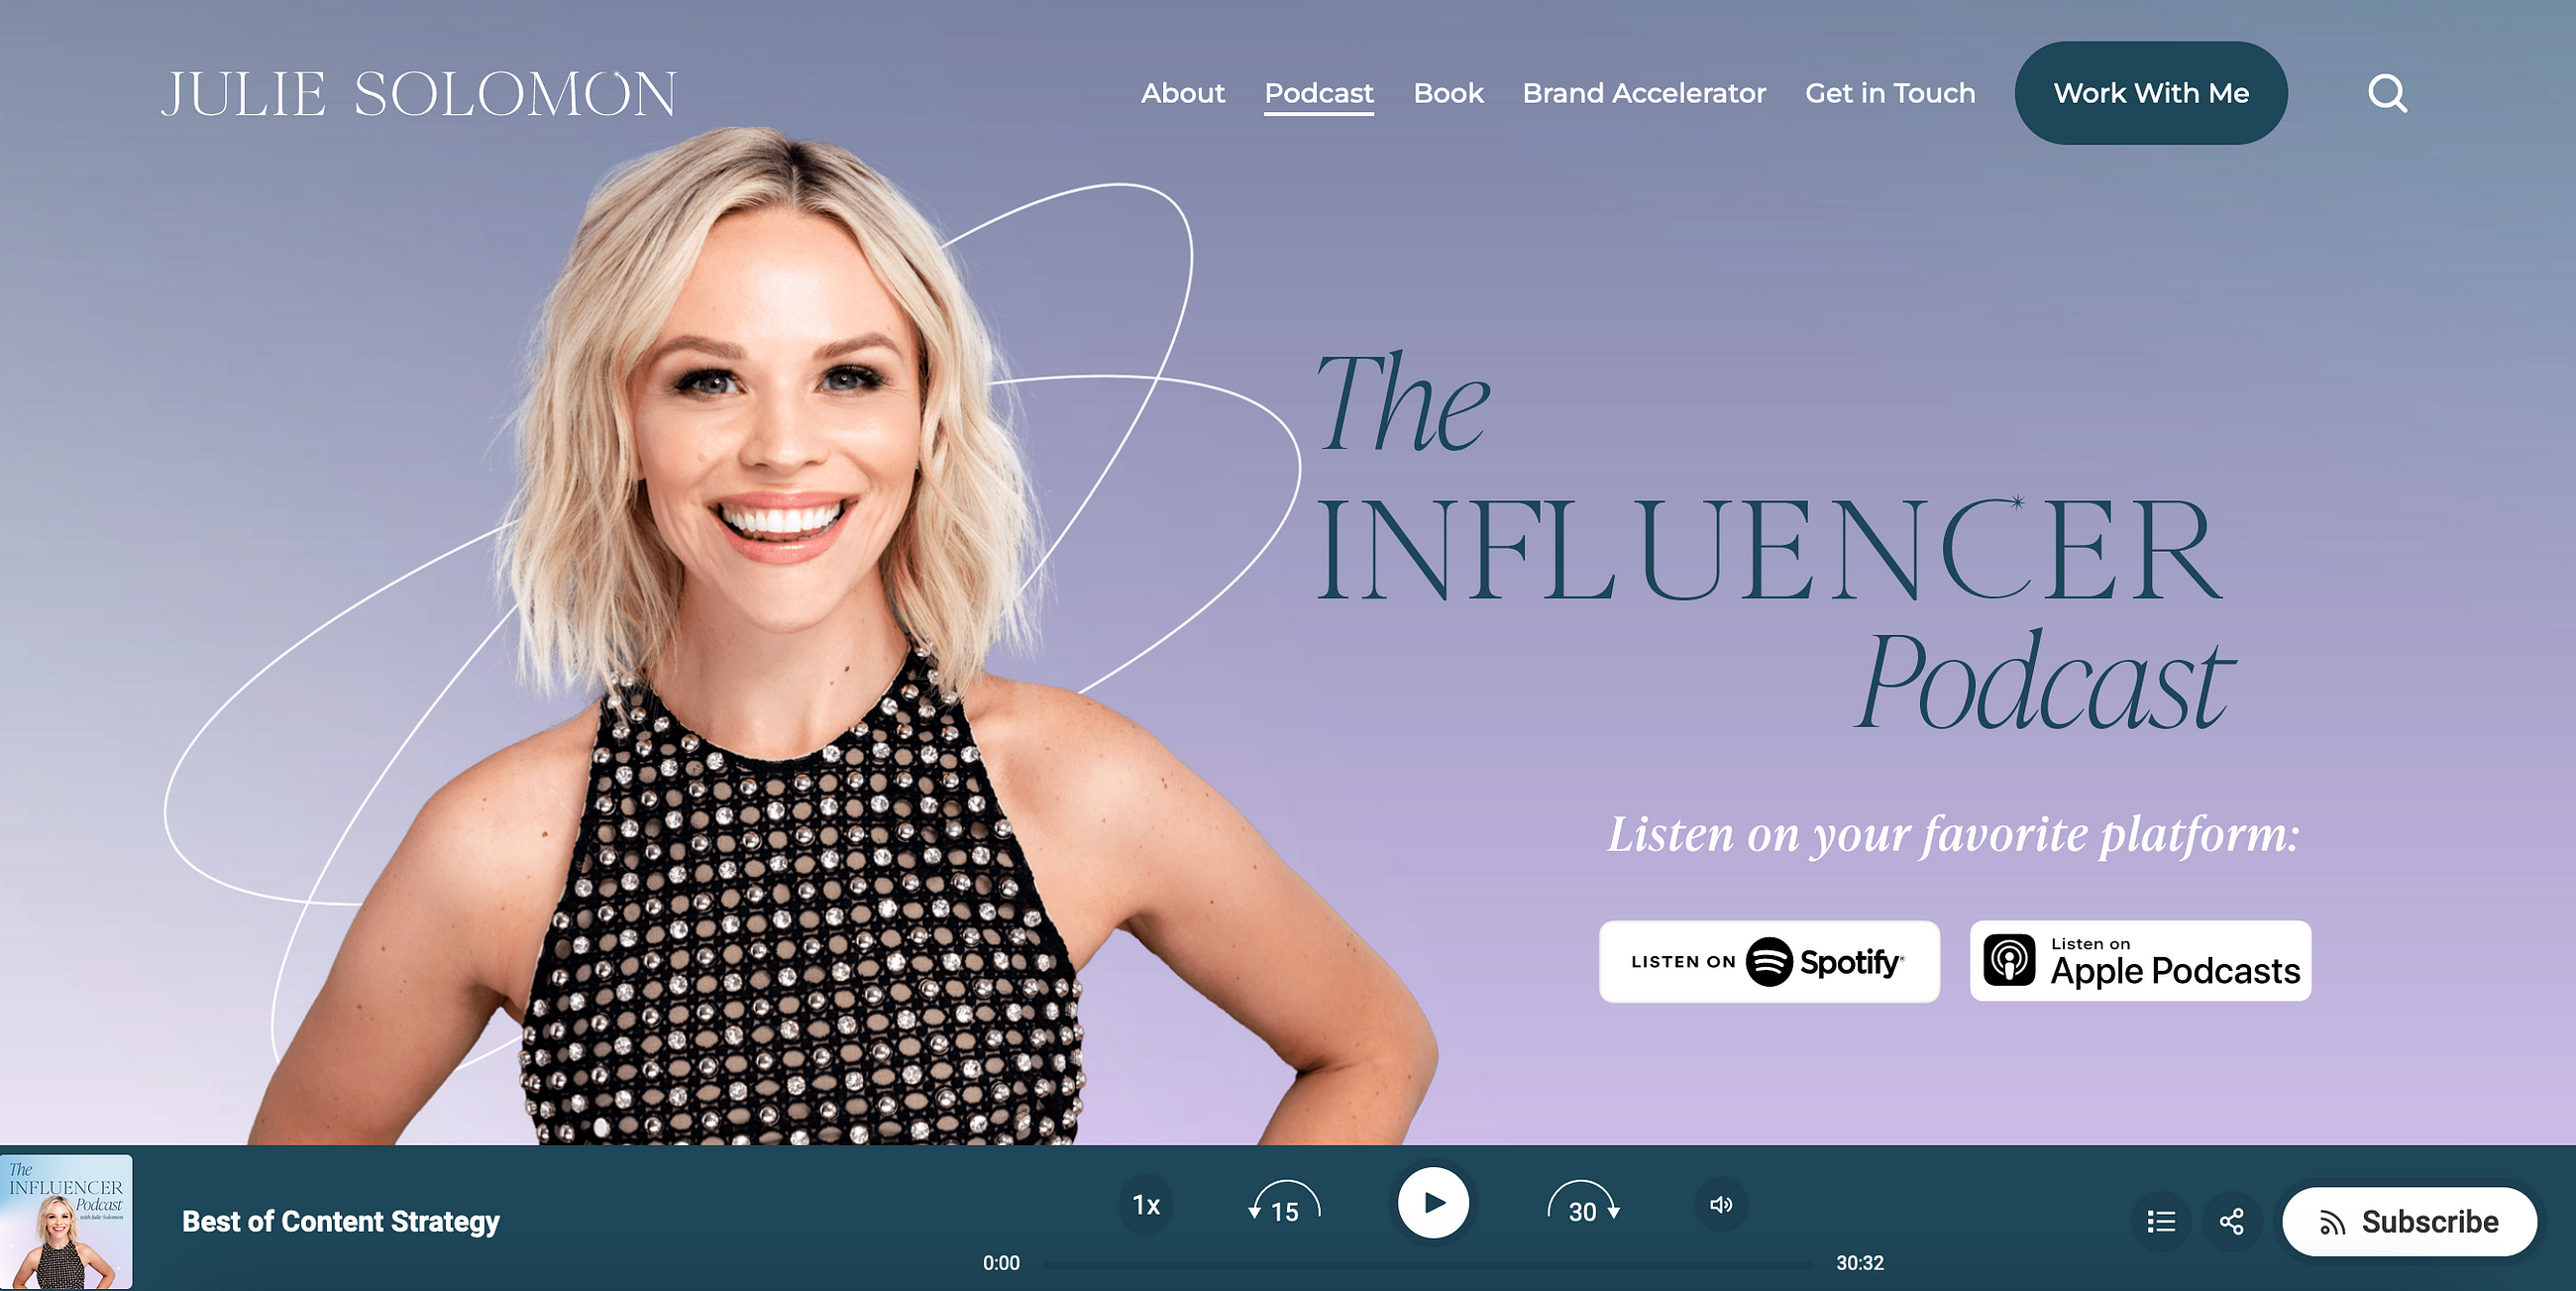 Mastering the Influencer Marketing Game: My Top 5 Go-To Resources